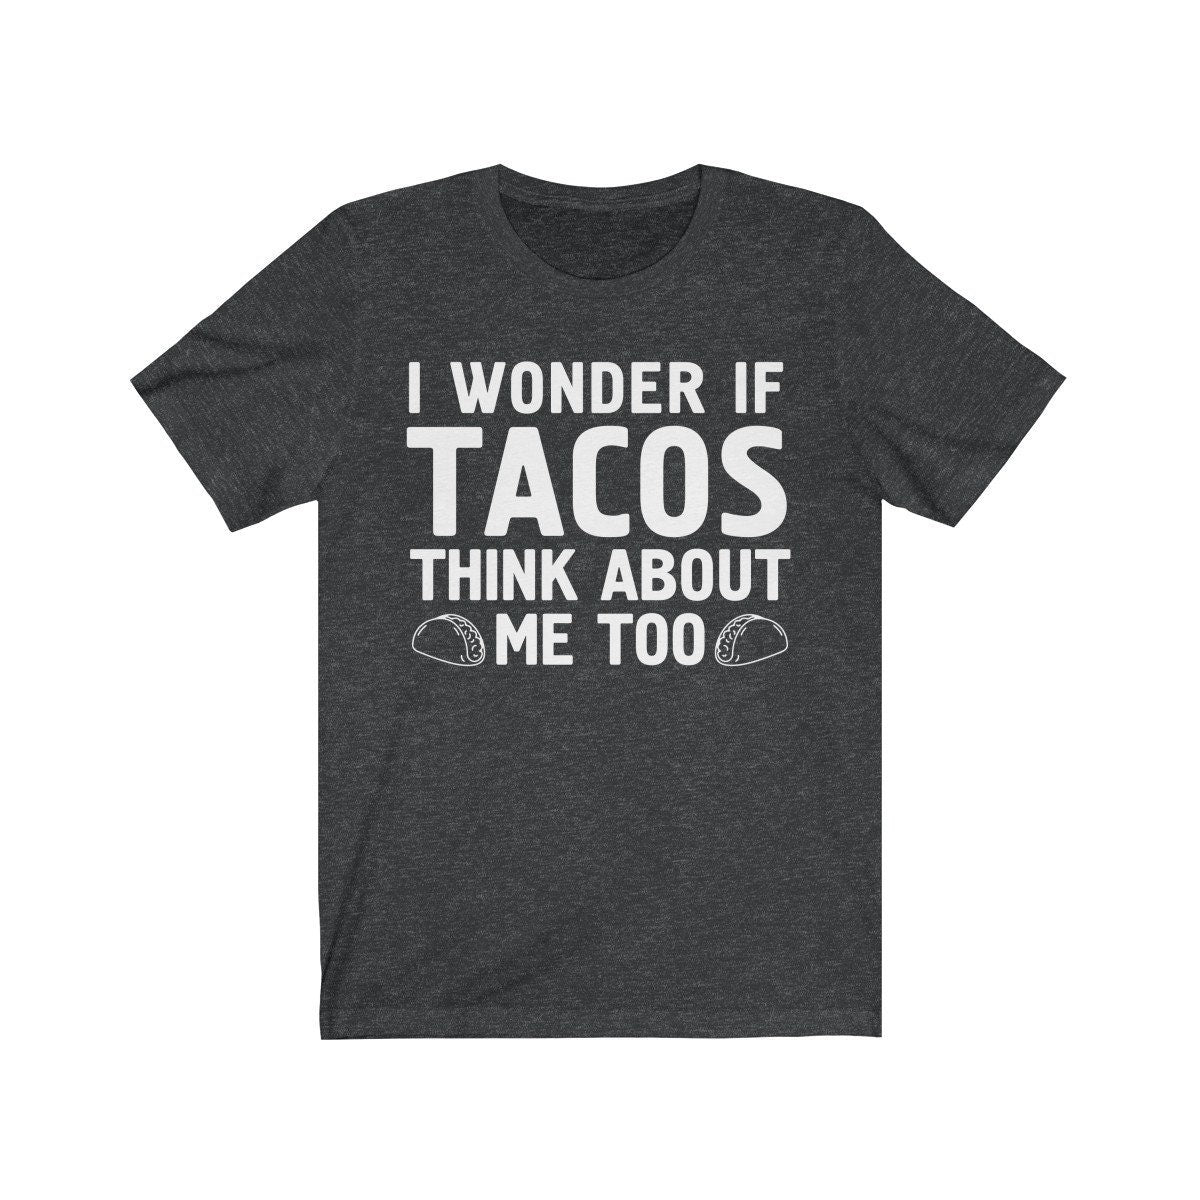 I Wonder if Tacos think about me too Gift t-shirt for Women Men